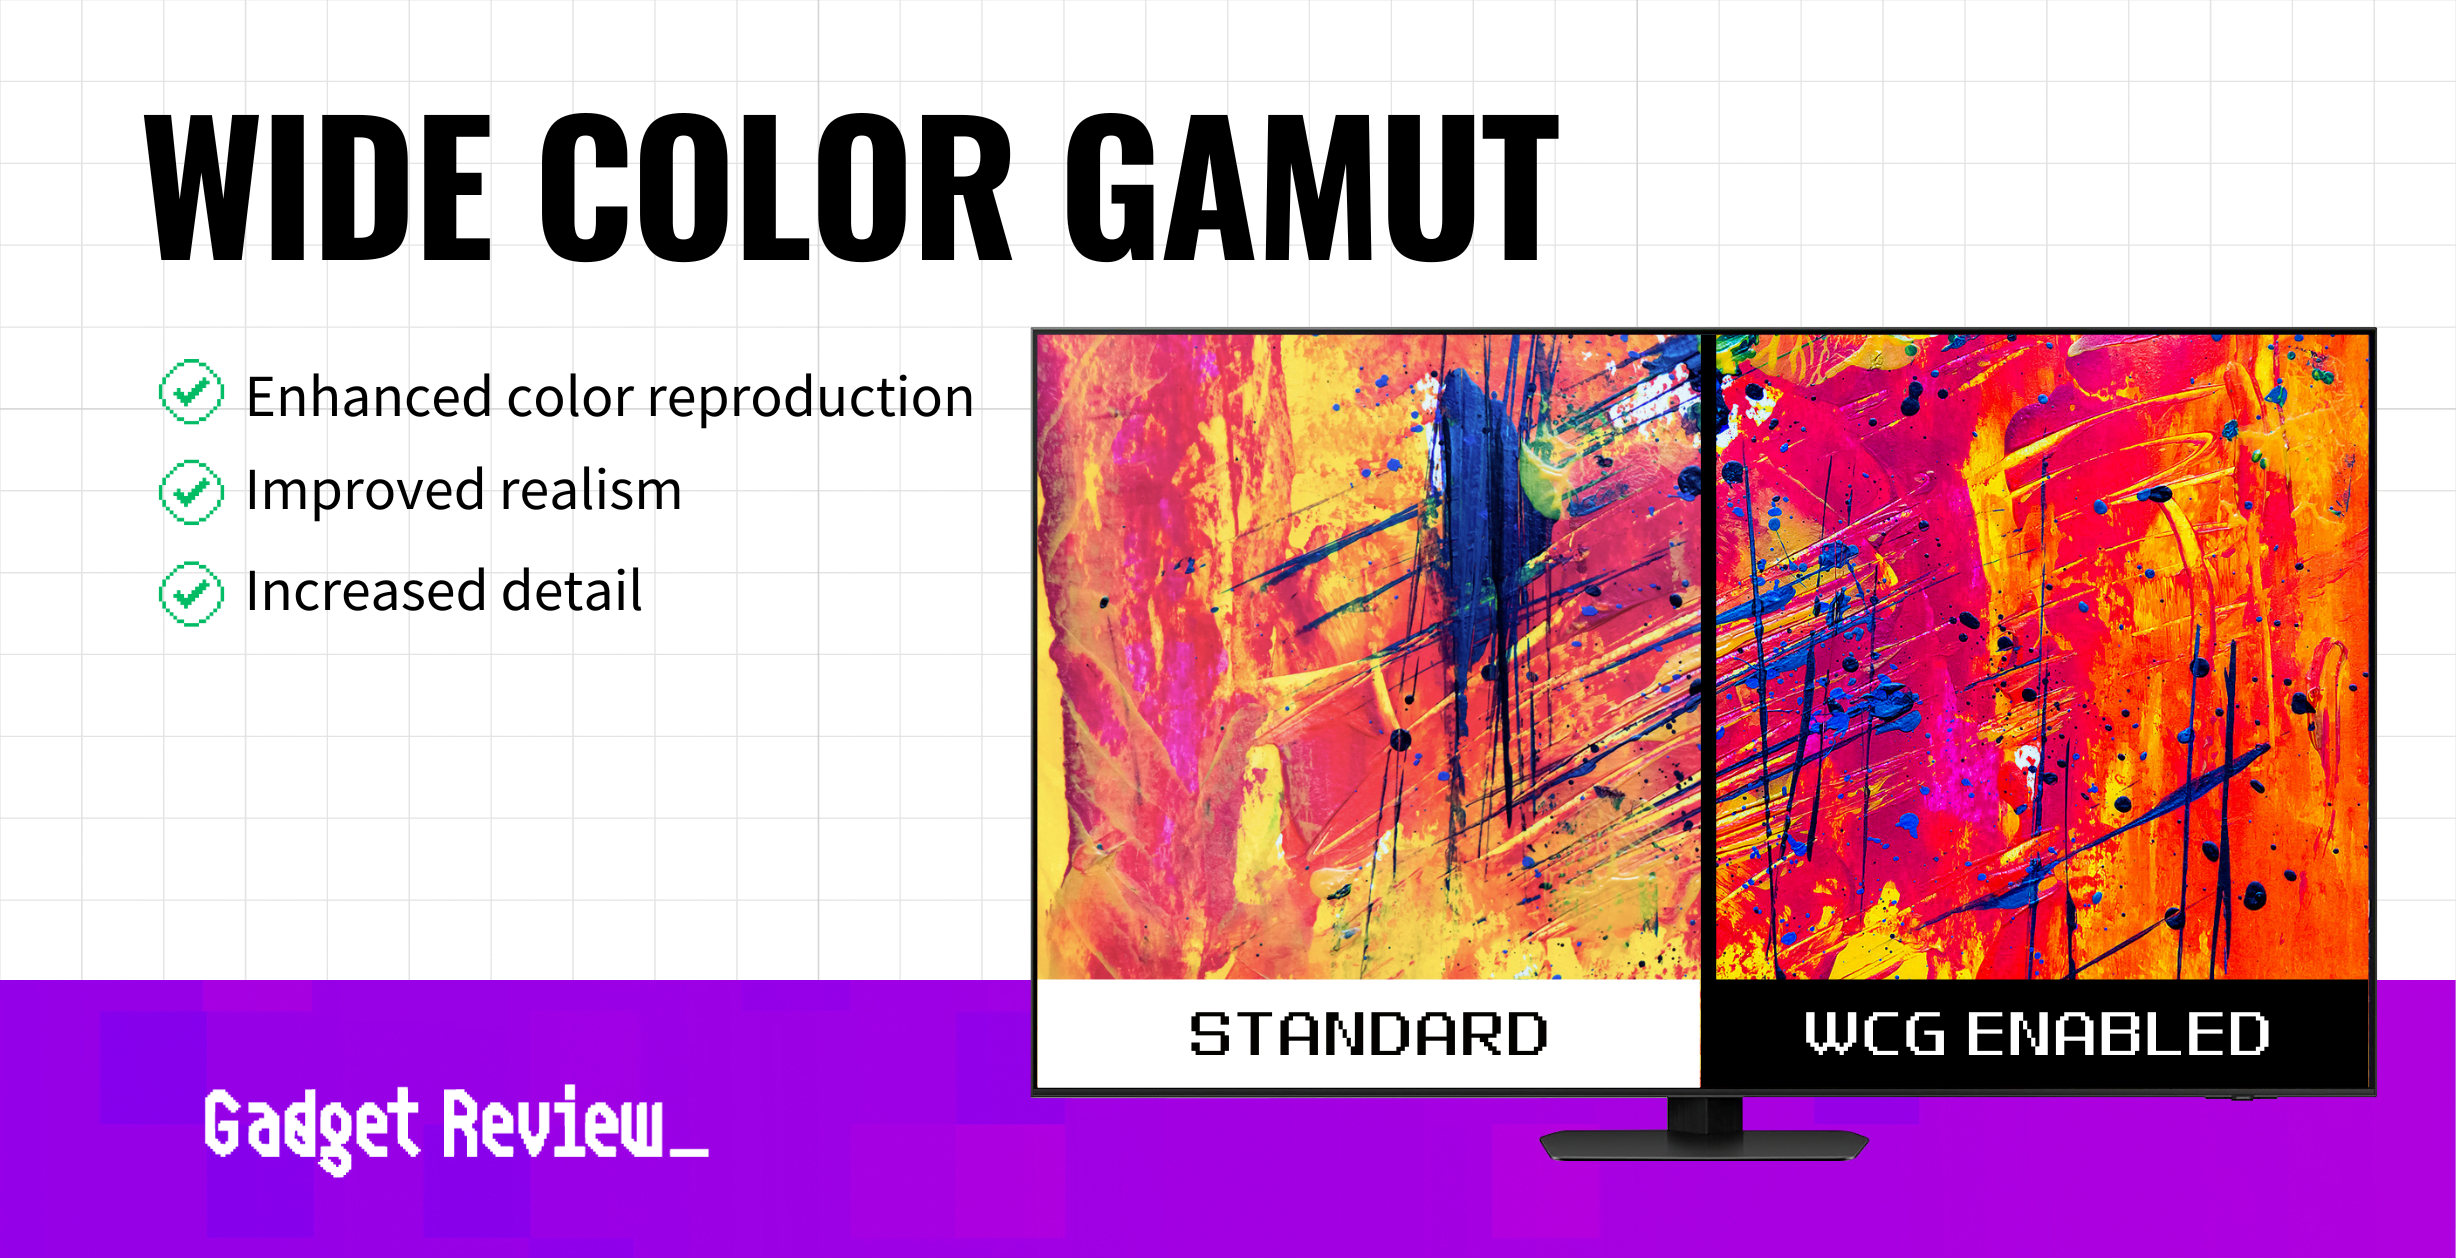 Wide Color Gamut – What is it?